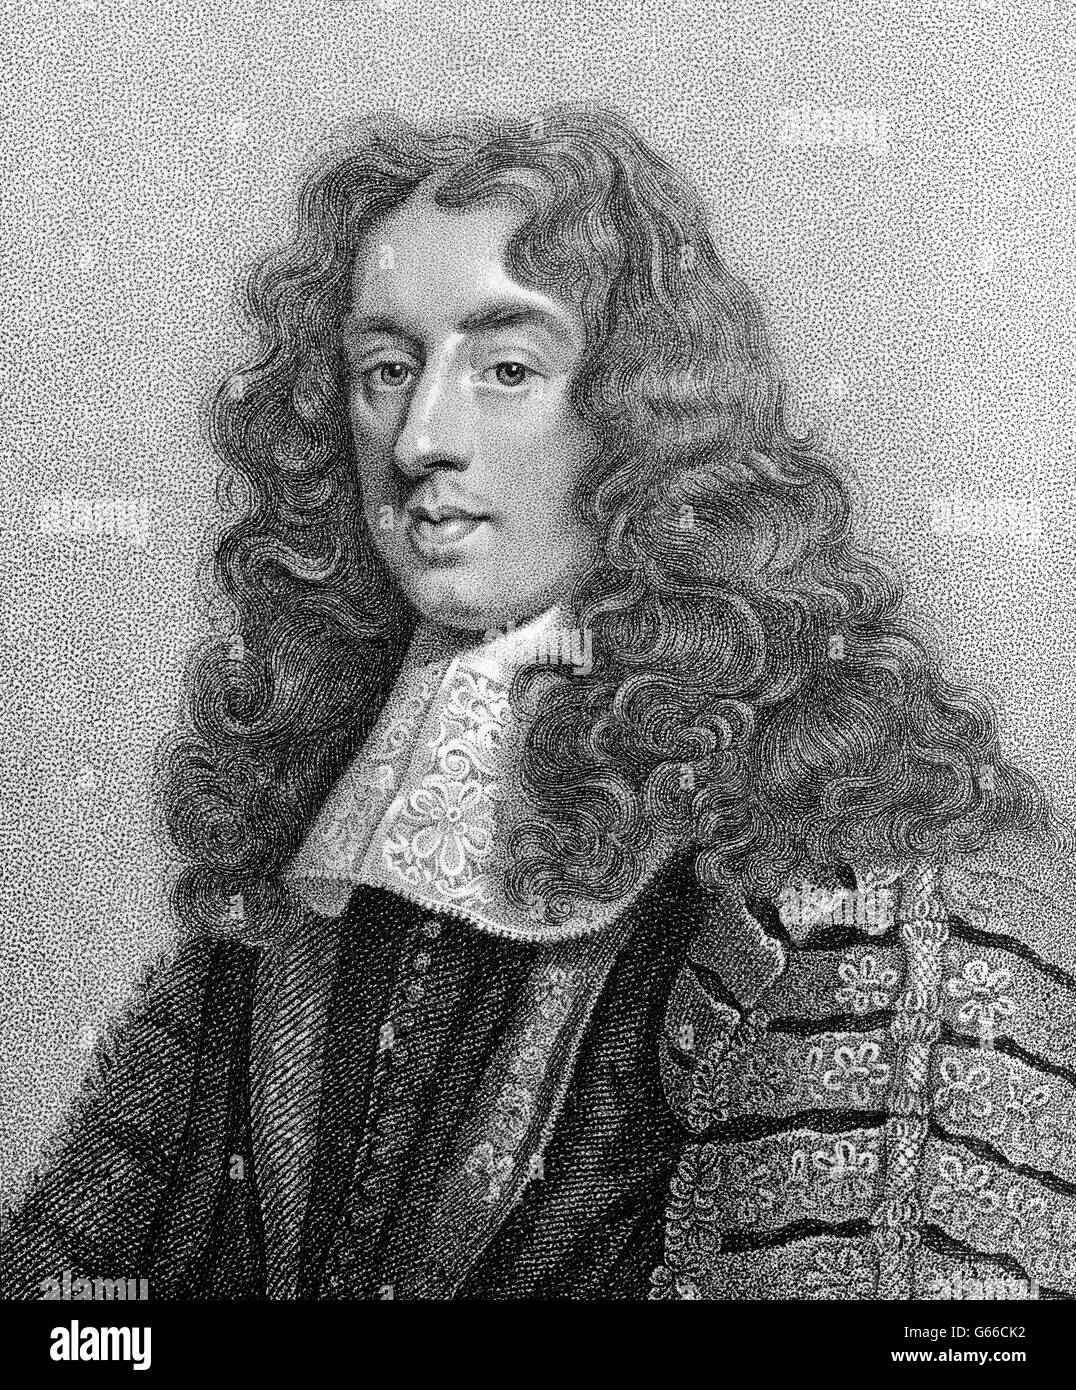 Heneage Finch, 1st Earl of Nottingham, PC, 1621-1682, Lord Chancellor of England Stock Photo